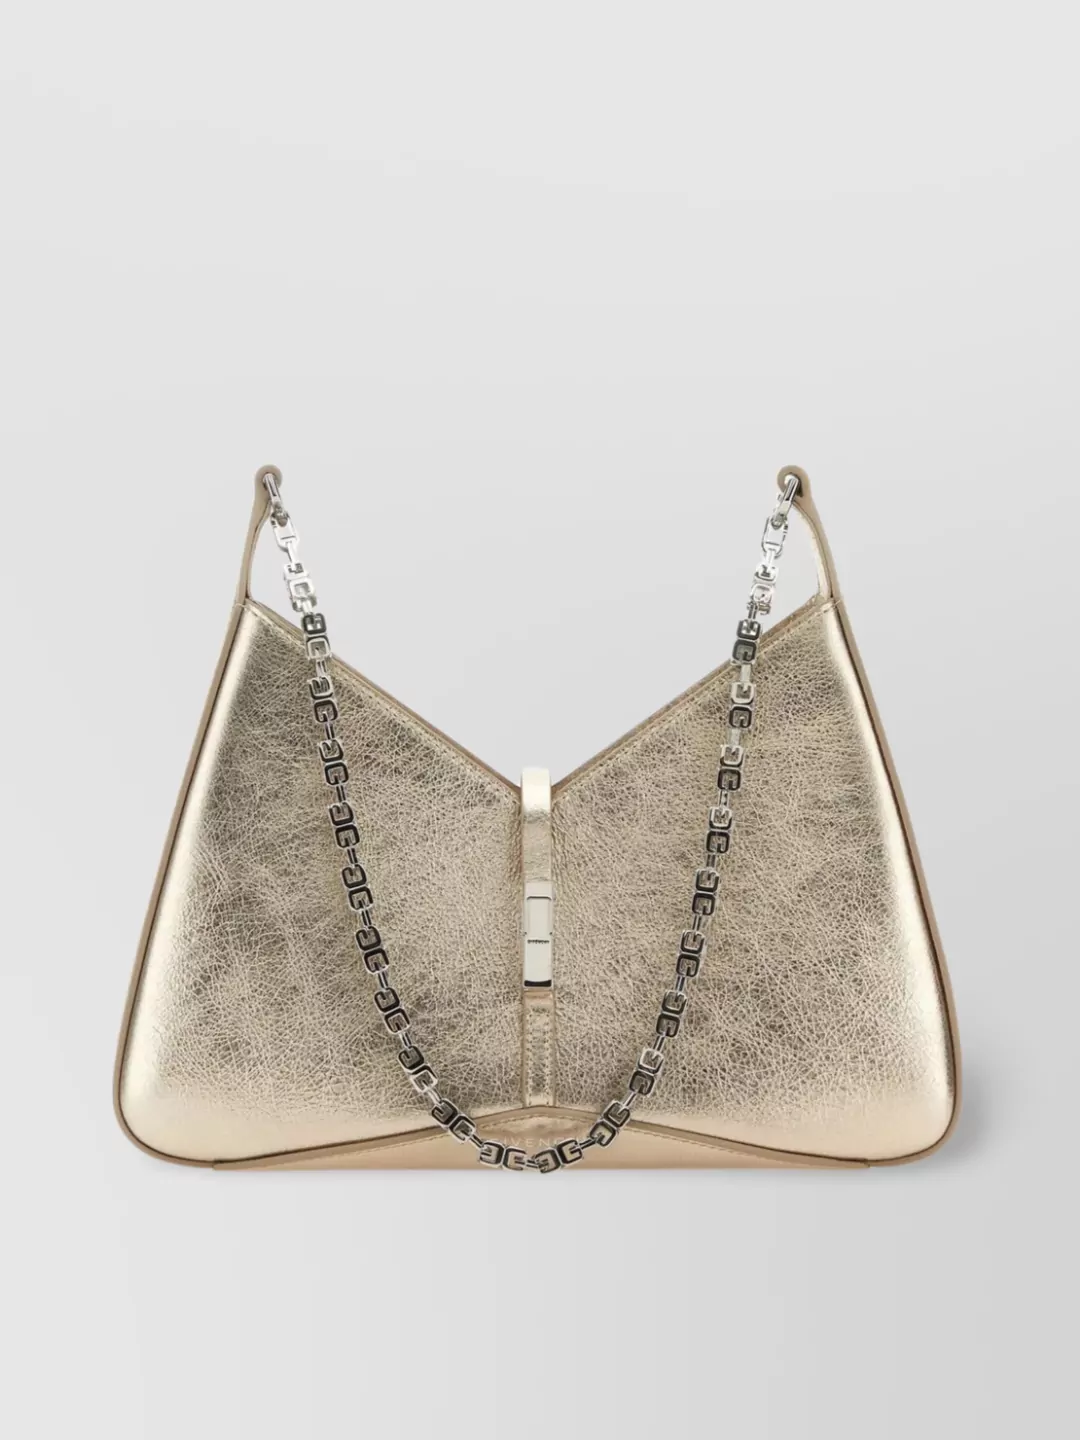 Givenchy Small Leather Shoulder Bag With Cut-out Design In Brown